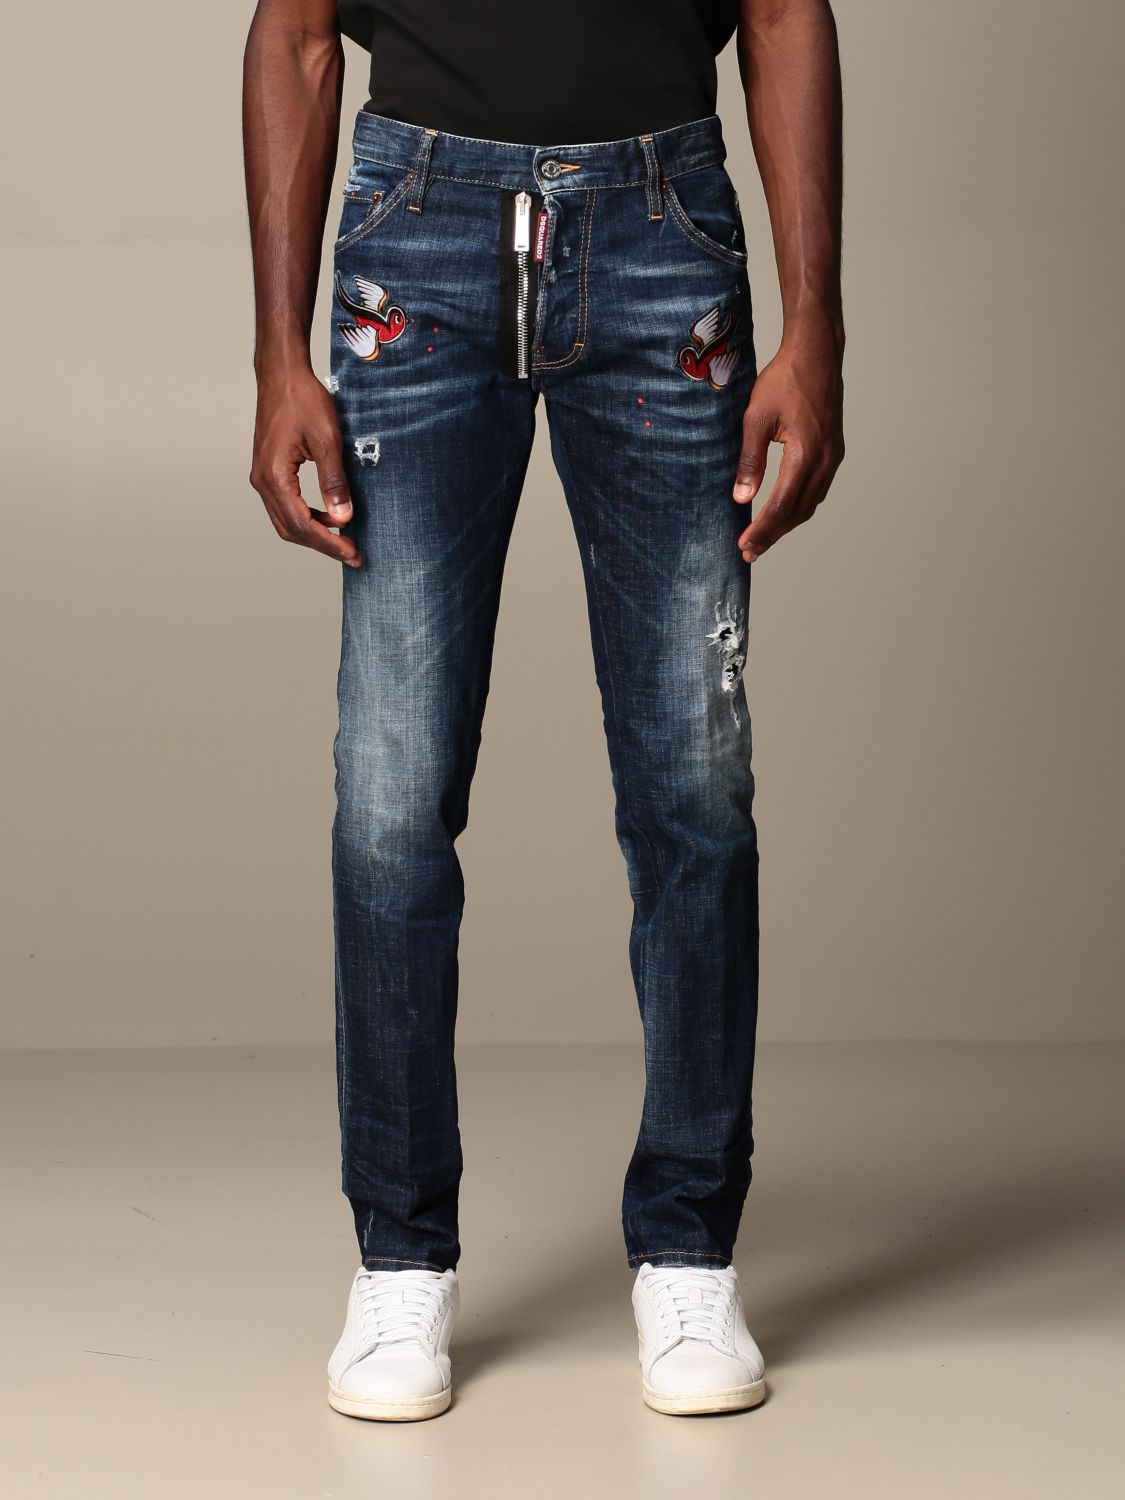 dsquared2 jeans cool guy